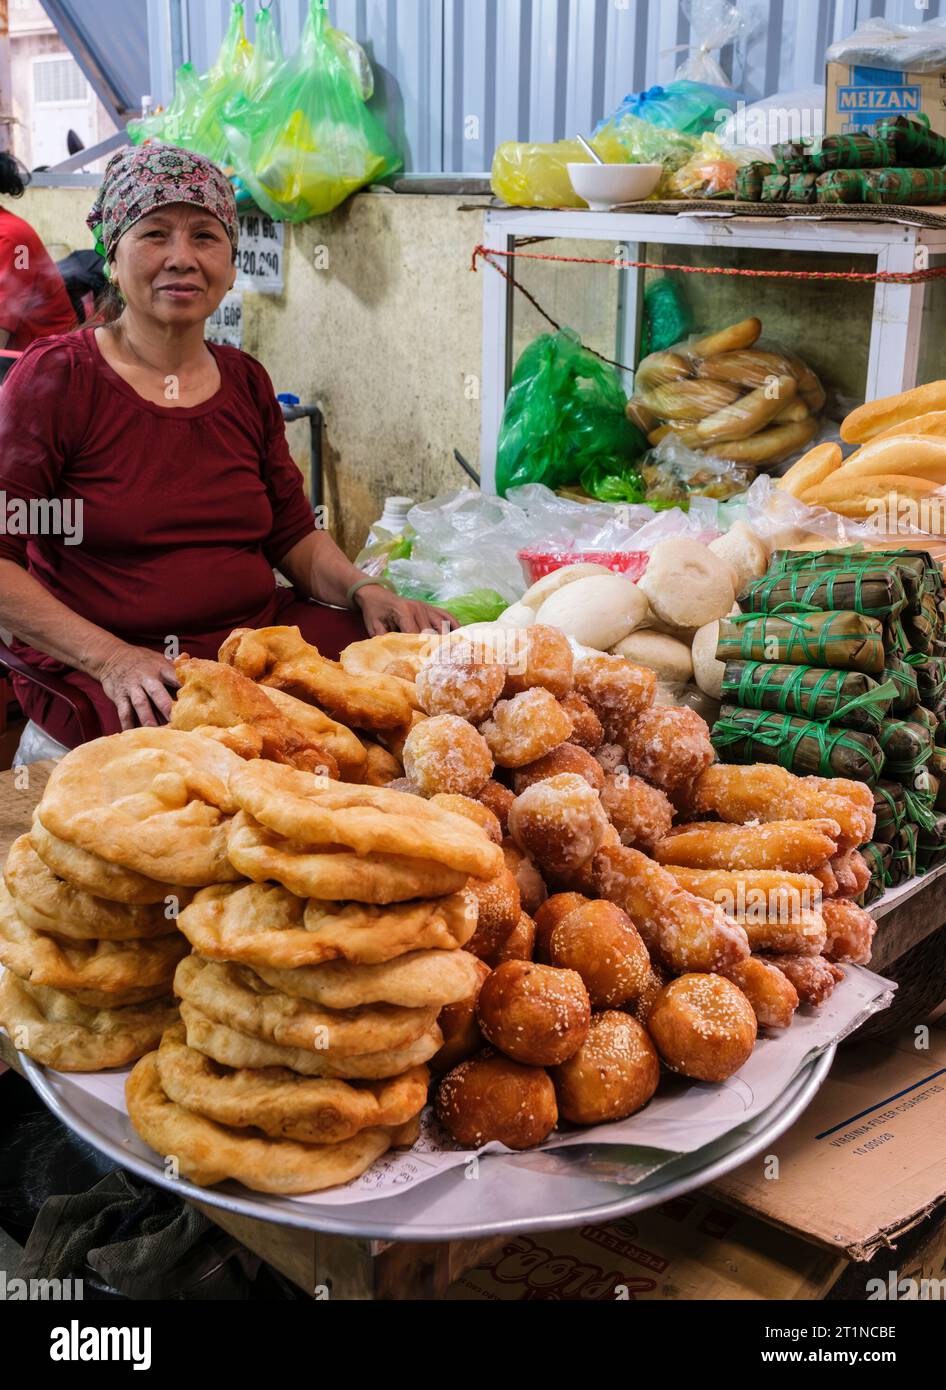 Cat Ba, Vietnam. Vendor Selling Bread and Pastries, Early Morning. Stock Photo